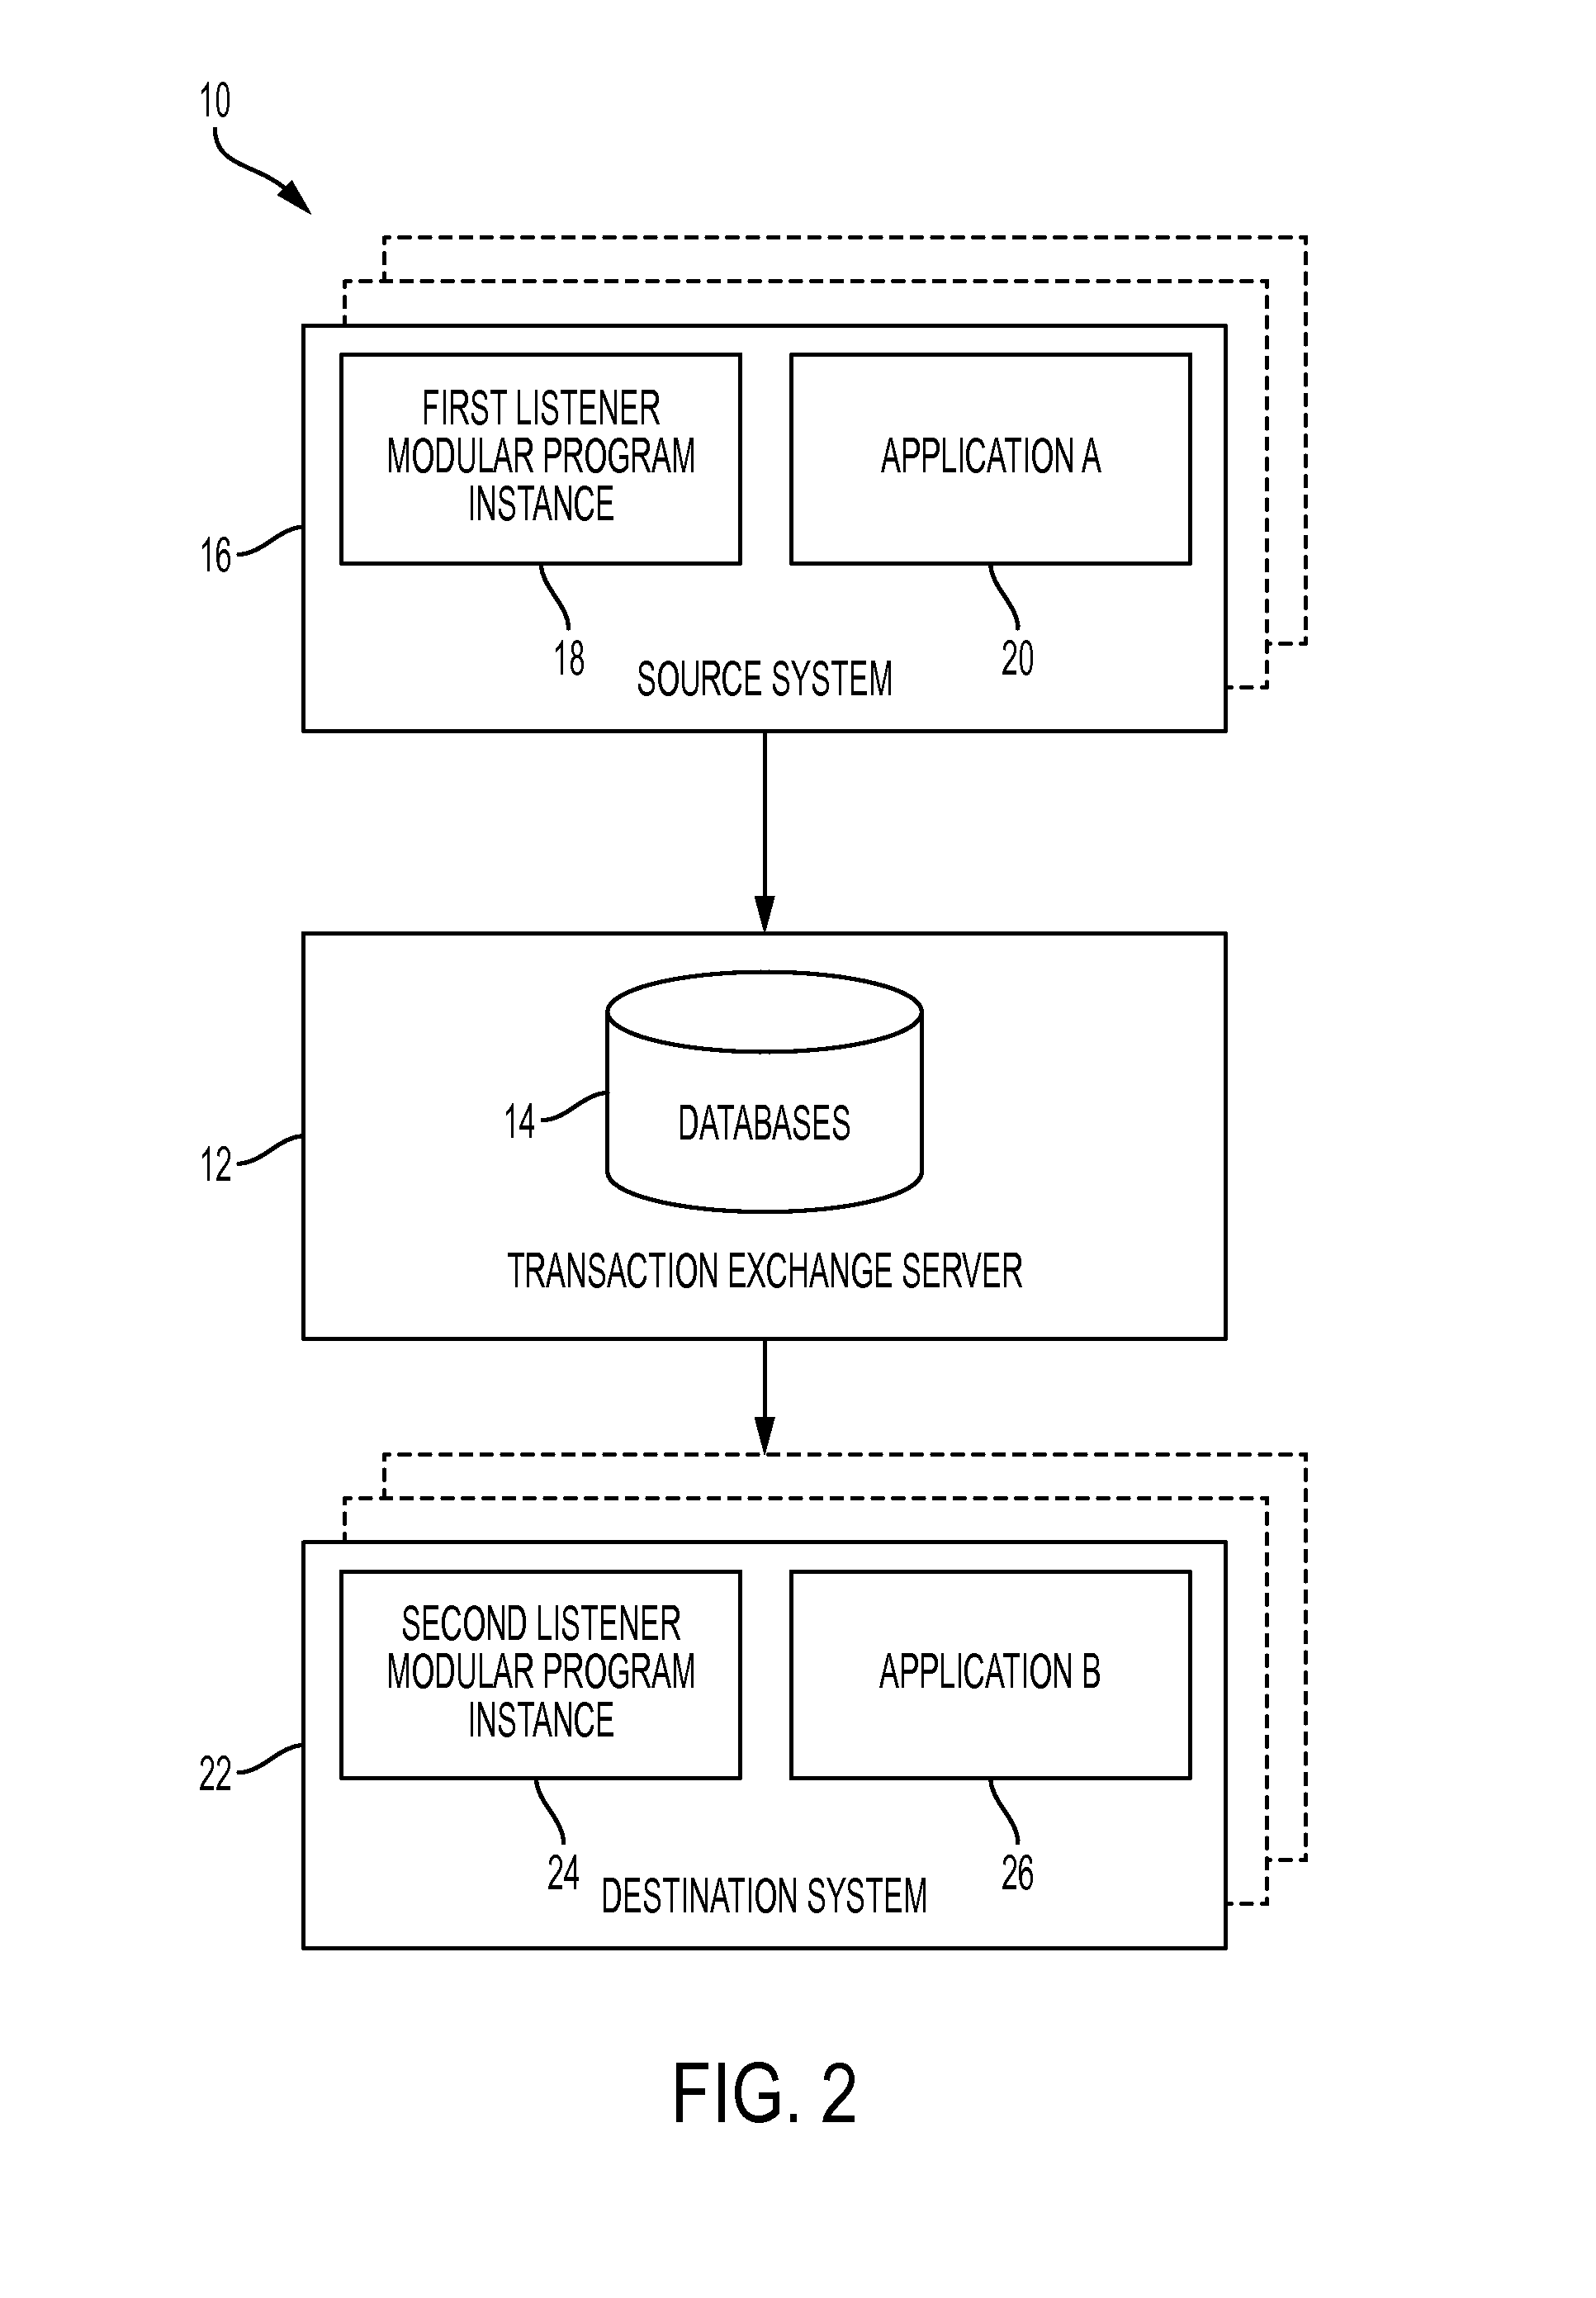 System and method for managing data transactions between applications